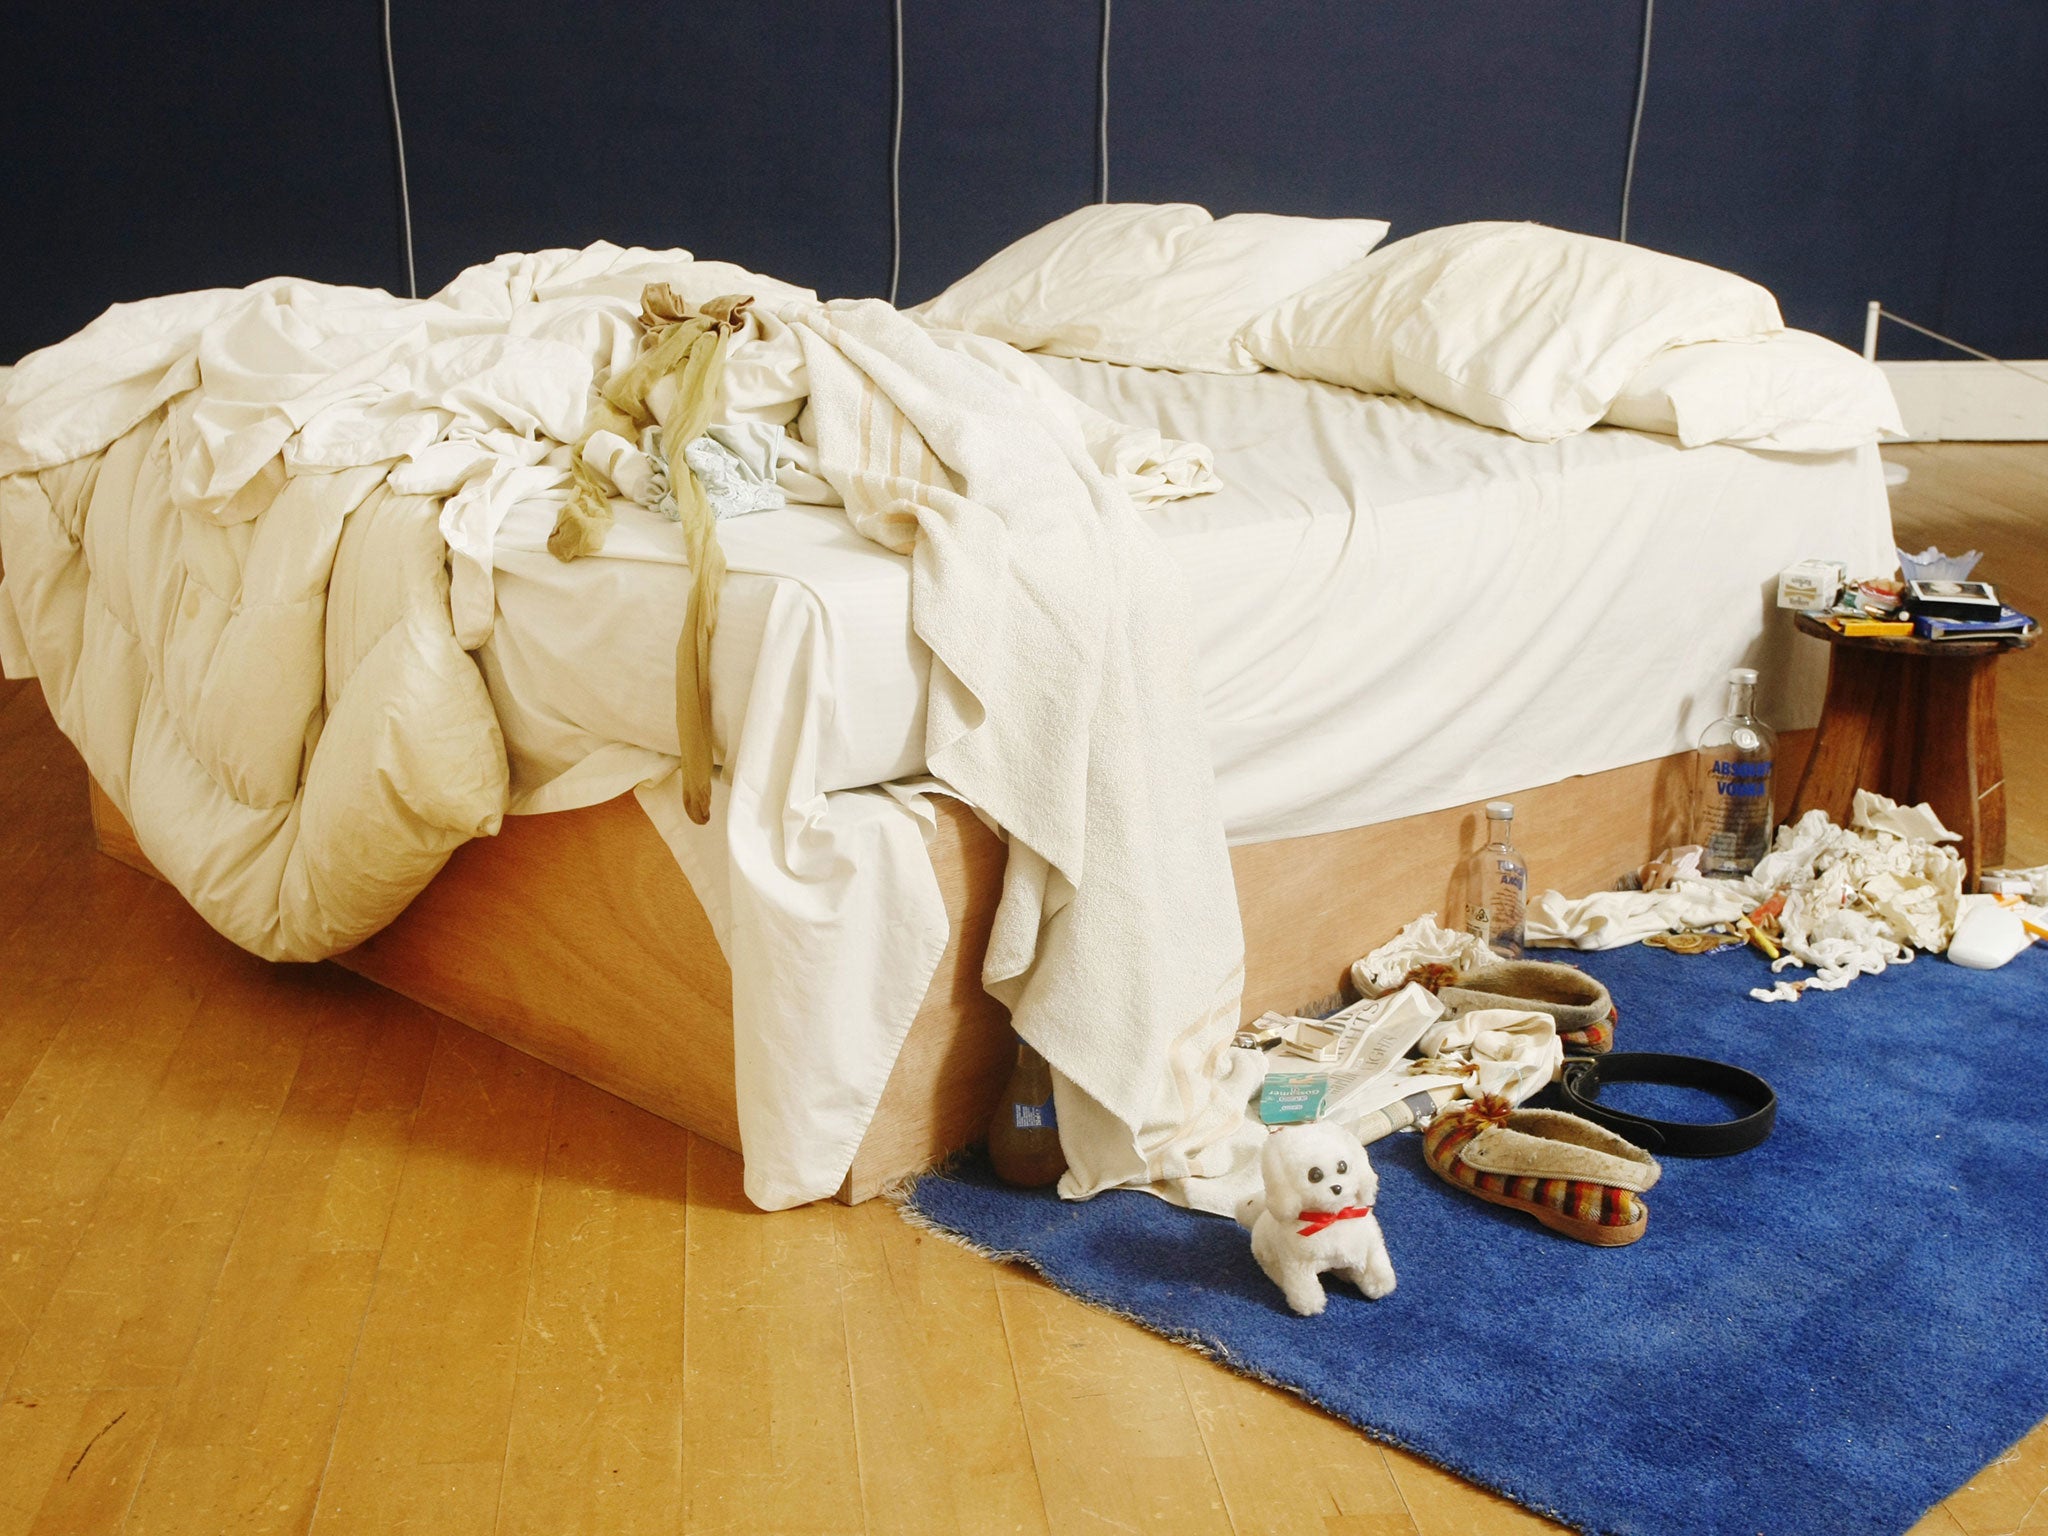 Tracy Emin's 'My Bed' sold for £2.5m